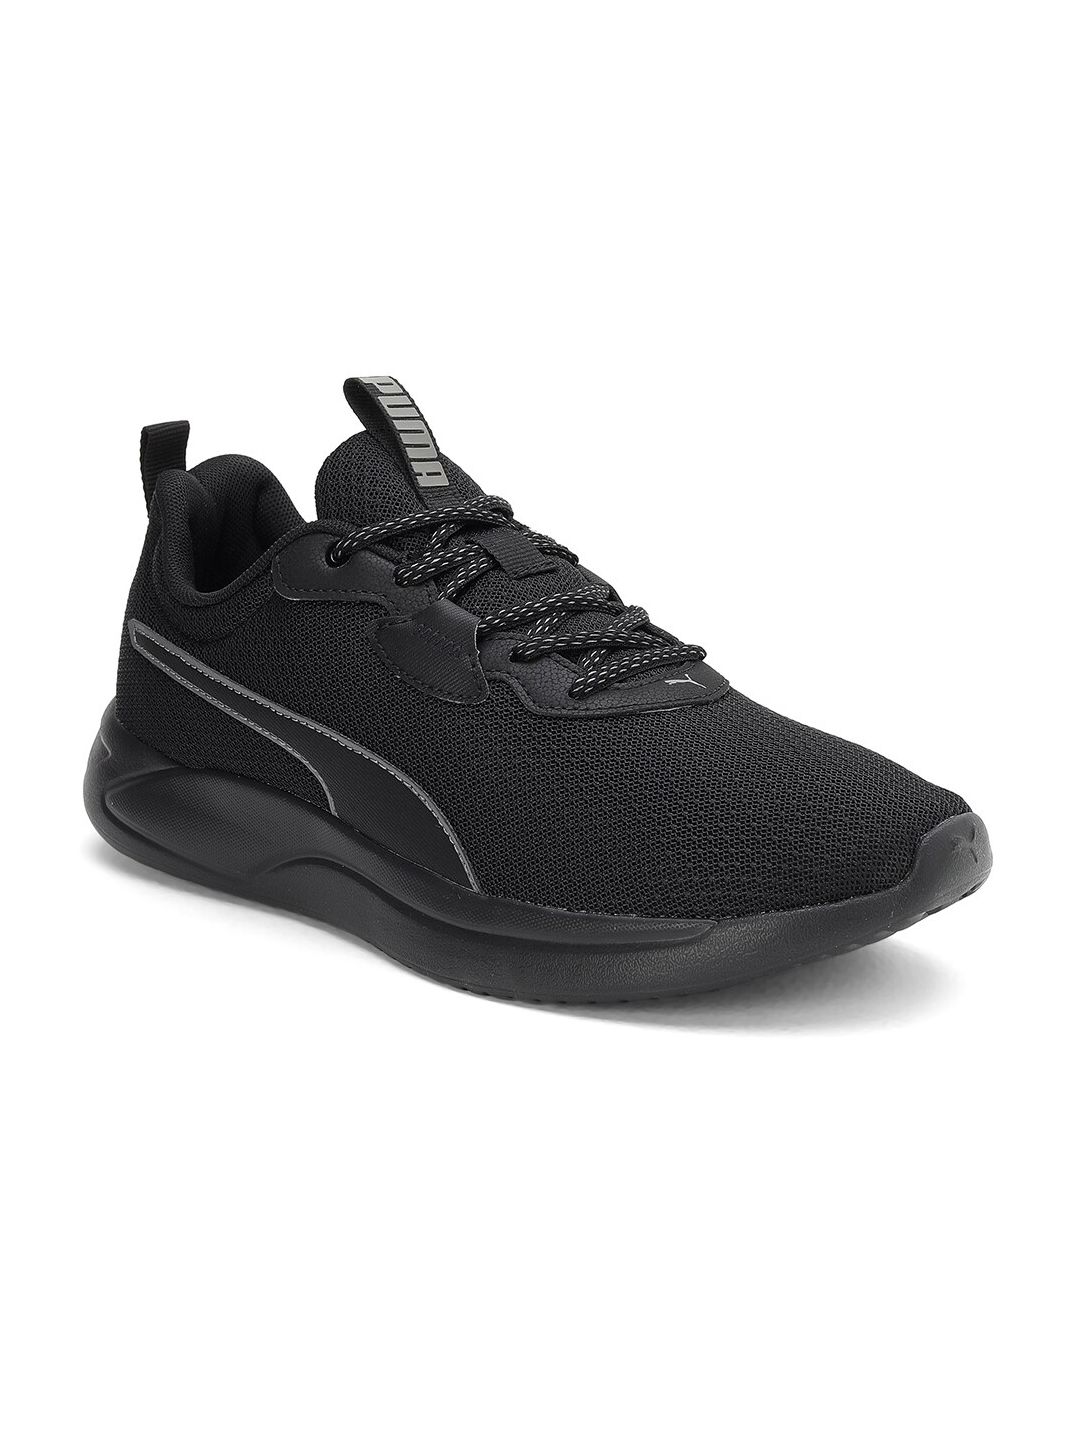 Puma Unisex Resolve Smooth Running Shoes Price in India